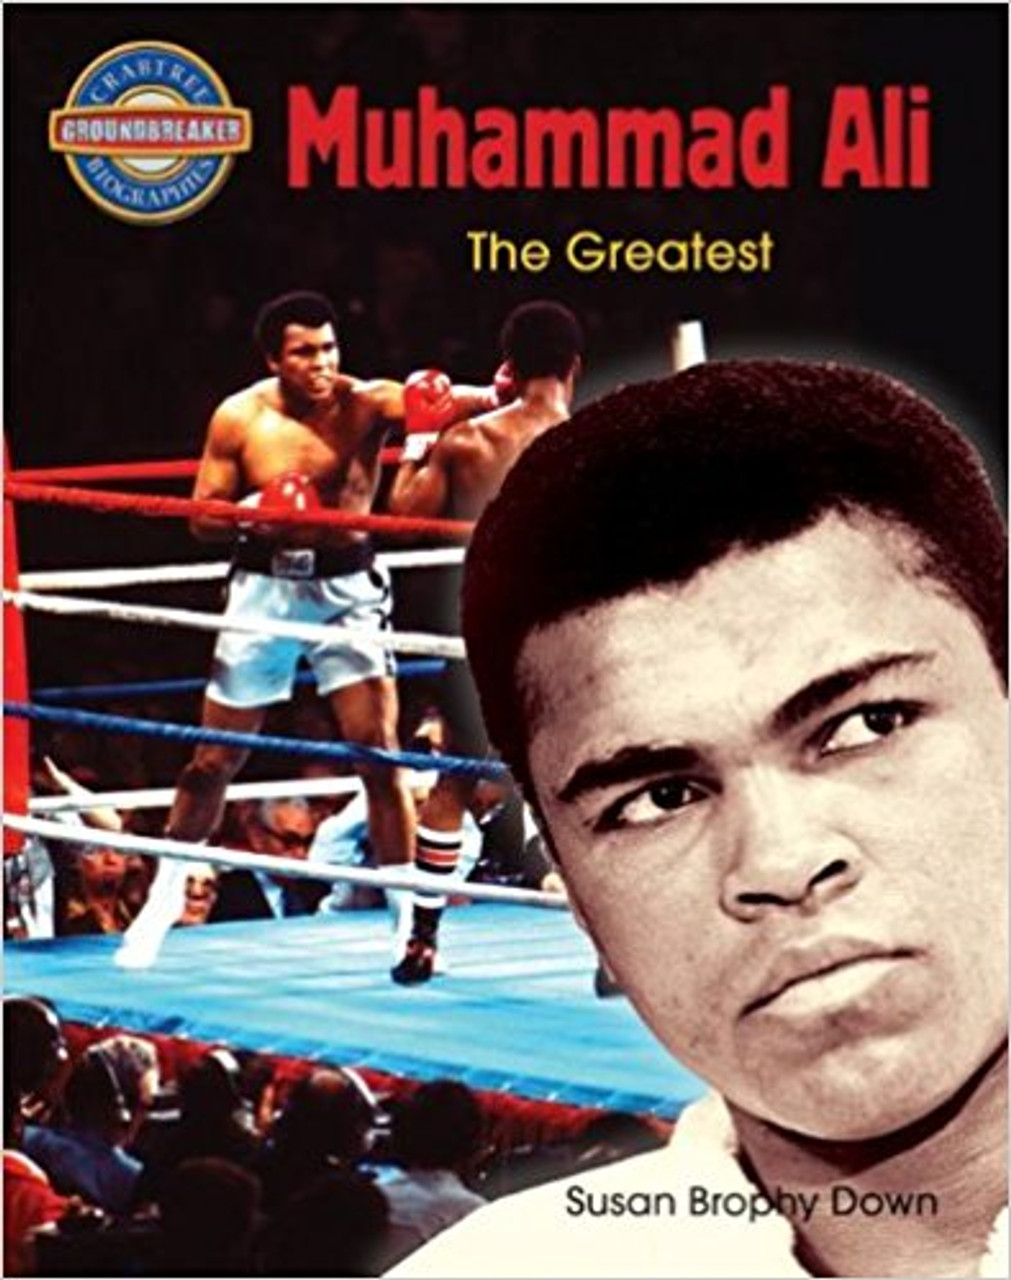 Muhammad Ali: The Greatest by Susan Brophy Down